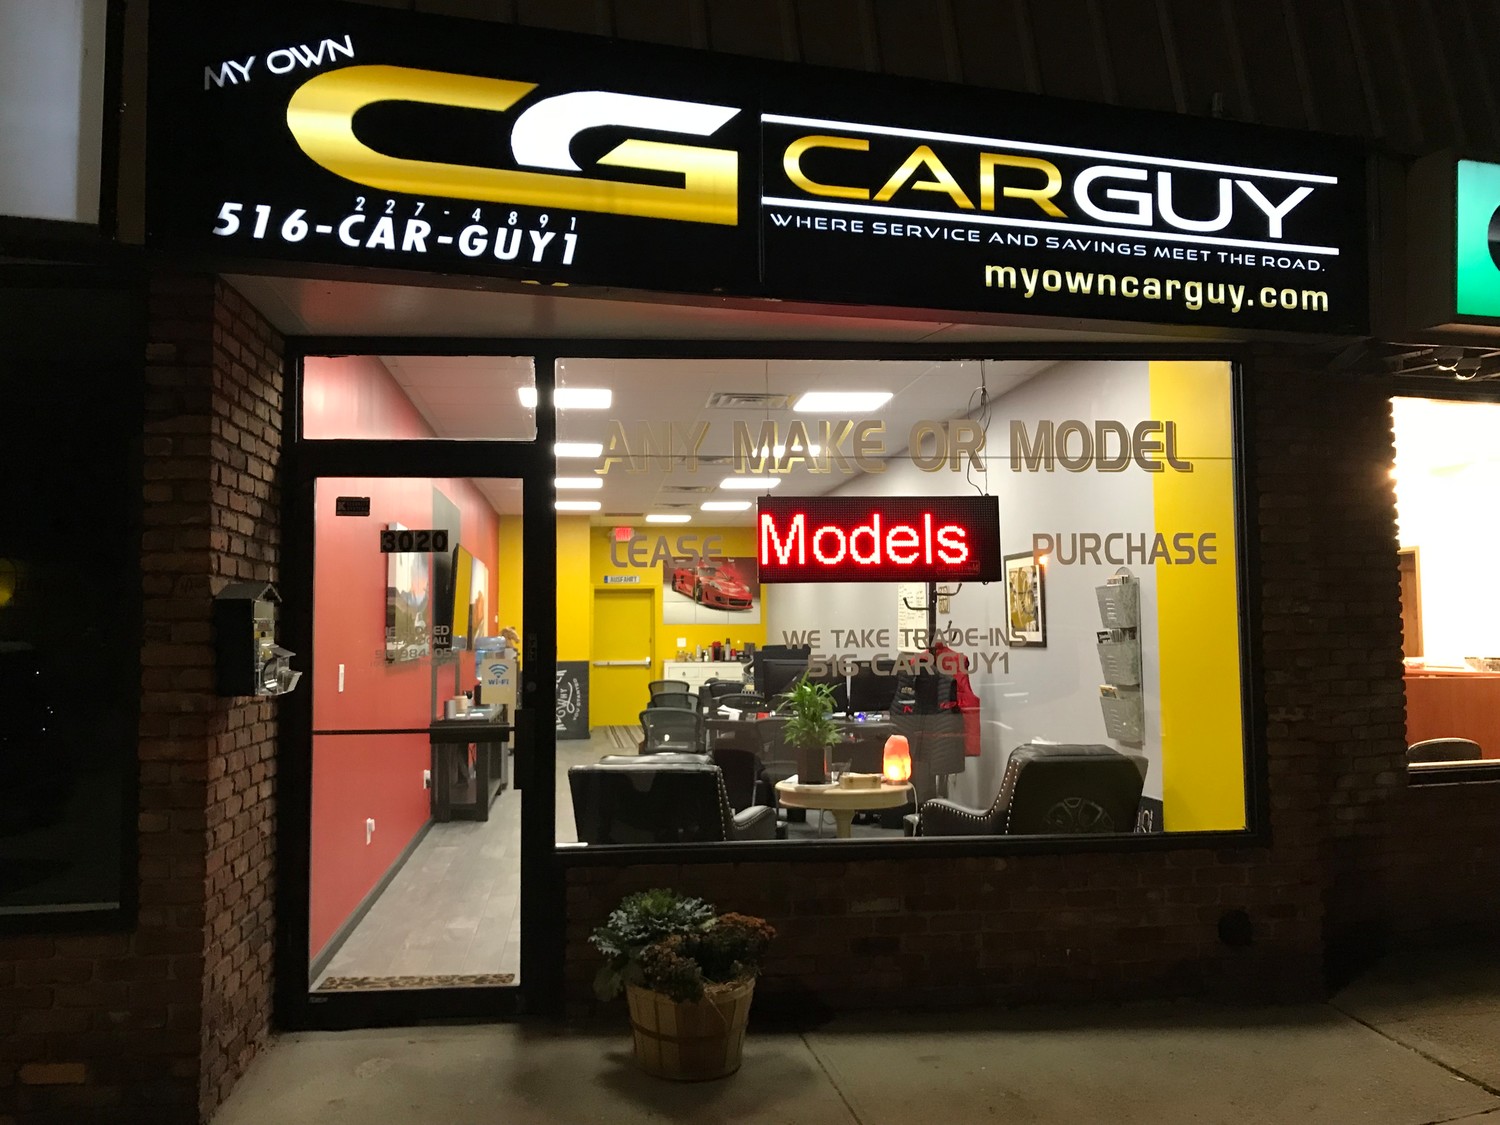 My Own Car Guy opened in Wantagh in June 2017.